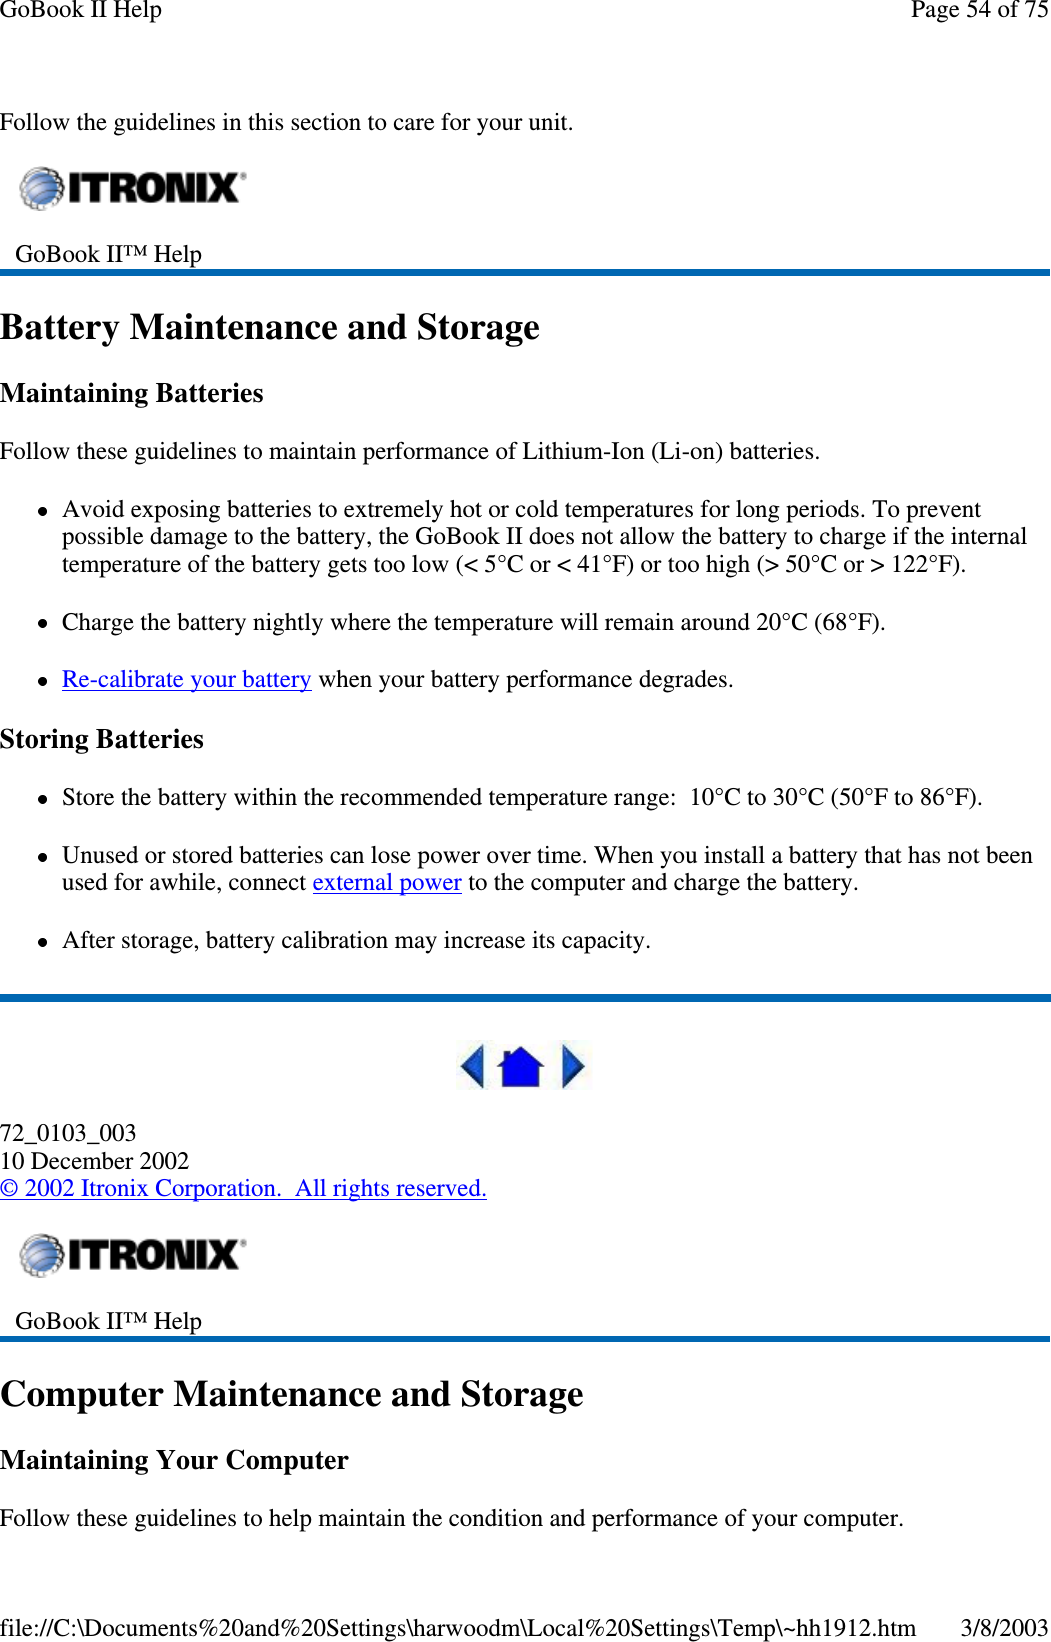 Follow the guidelines in this section to care for your unit.Battery Maintenance and StorageMaintaining BatteriesFollow these guidelines to maintain performance of Lithium-Ion (Li-on) batteries.Avoid exposing batteries to extremely hot or cold temperatures for long periods. To preventpossible damage to the battery, the GoBook II does not allow the battery to charge if the internaltemperature of the battery gets too low (&lt; 5°C or &lt; 41°F) or too high (&gt; 50°C or &gt; 122°F).Charge the battery nightly where the temperature will remain around 20°C (68°F).Re-calibrate your battery when your battery performance degrades.Storing BatteriesStore the battery within the recommended temperature range: 10°C to 30°C (50°F to 86°F).Unused or stored batteries can lose power over time. When you install a battery that has not beenused for awhile, connect external power to the computer and charge the battery.After storage, battery calibration may increase its capacity.72_0103_00310 December 2002©2002 Itronix Corporation. All rights reserved.Computer Maintenance and StorageMaintaining Your ComputerFollow theseguidelines to helpmaintain the condition andperformance ofyour computer.GoBook II™ HelpGoBook II™ HelpPage54of75GoBook II Help3/8/2003file://C:\Documents%20and%20Settings\harwoodm\Local%20Settings\Temp\~hh1912.htm